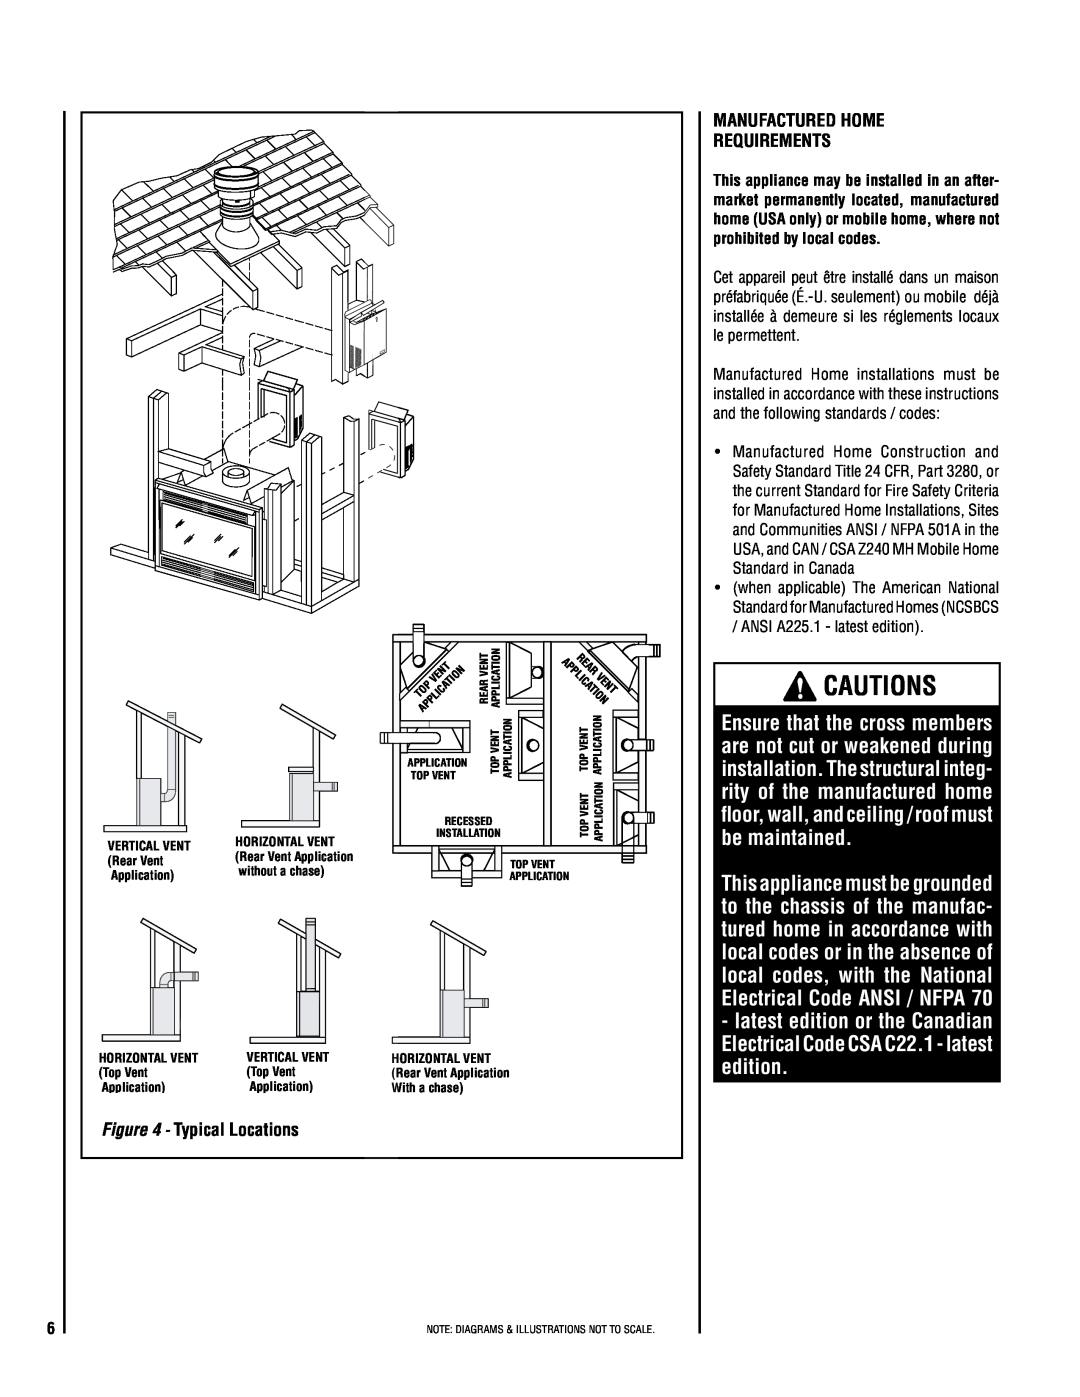 TOA Electronics SSDV-3328 installation instructions Cautions, Manufactured Home Requirements, Typical Locations 